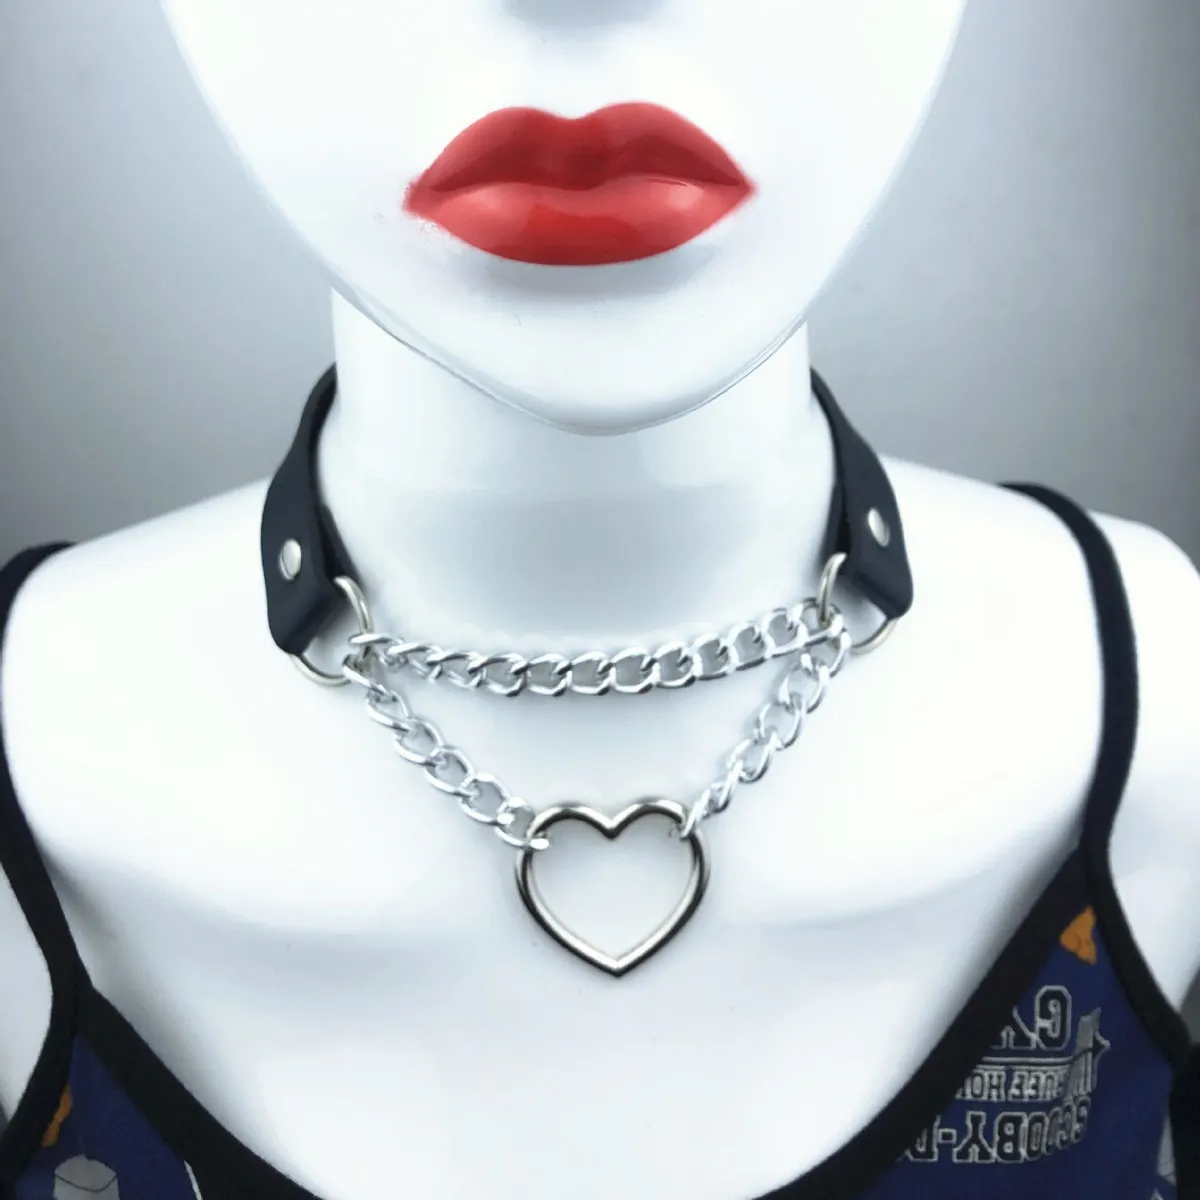 Chokers Gothic Black Spiked Punk Choker Collar Spikes Rivets Studded Chocker Necklace For Women Men Bondage Cosplay Goth Je Dhgarden Dhvjr